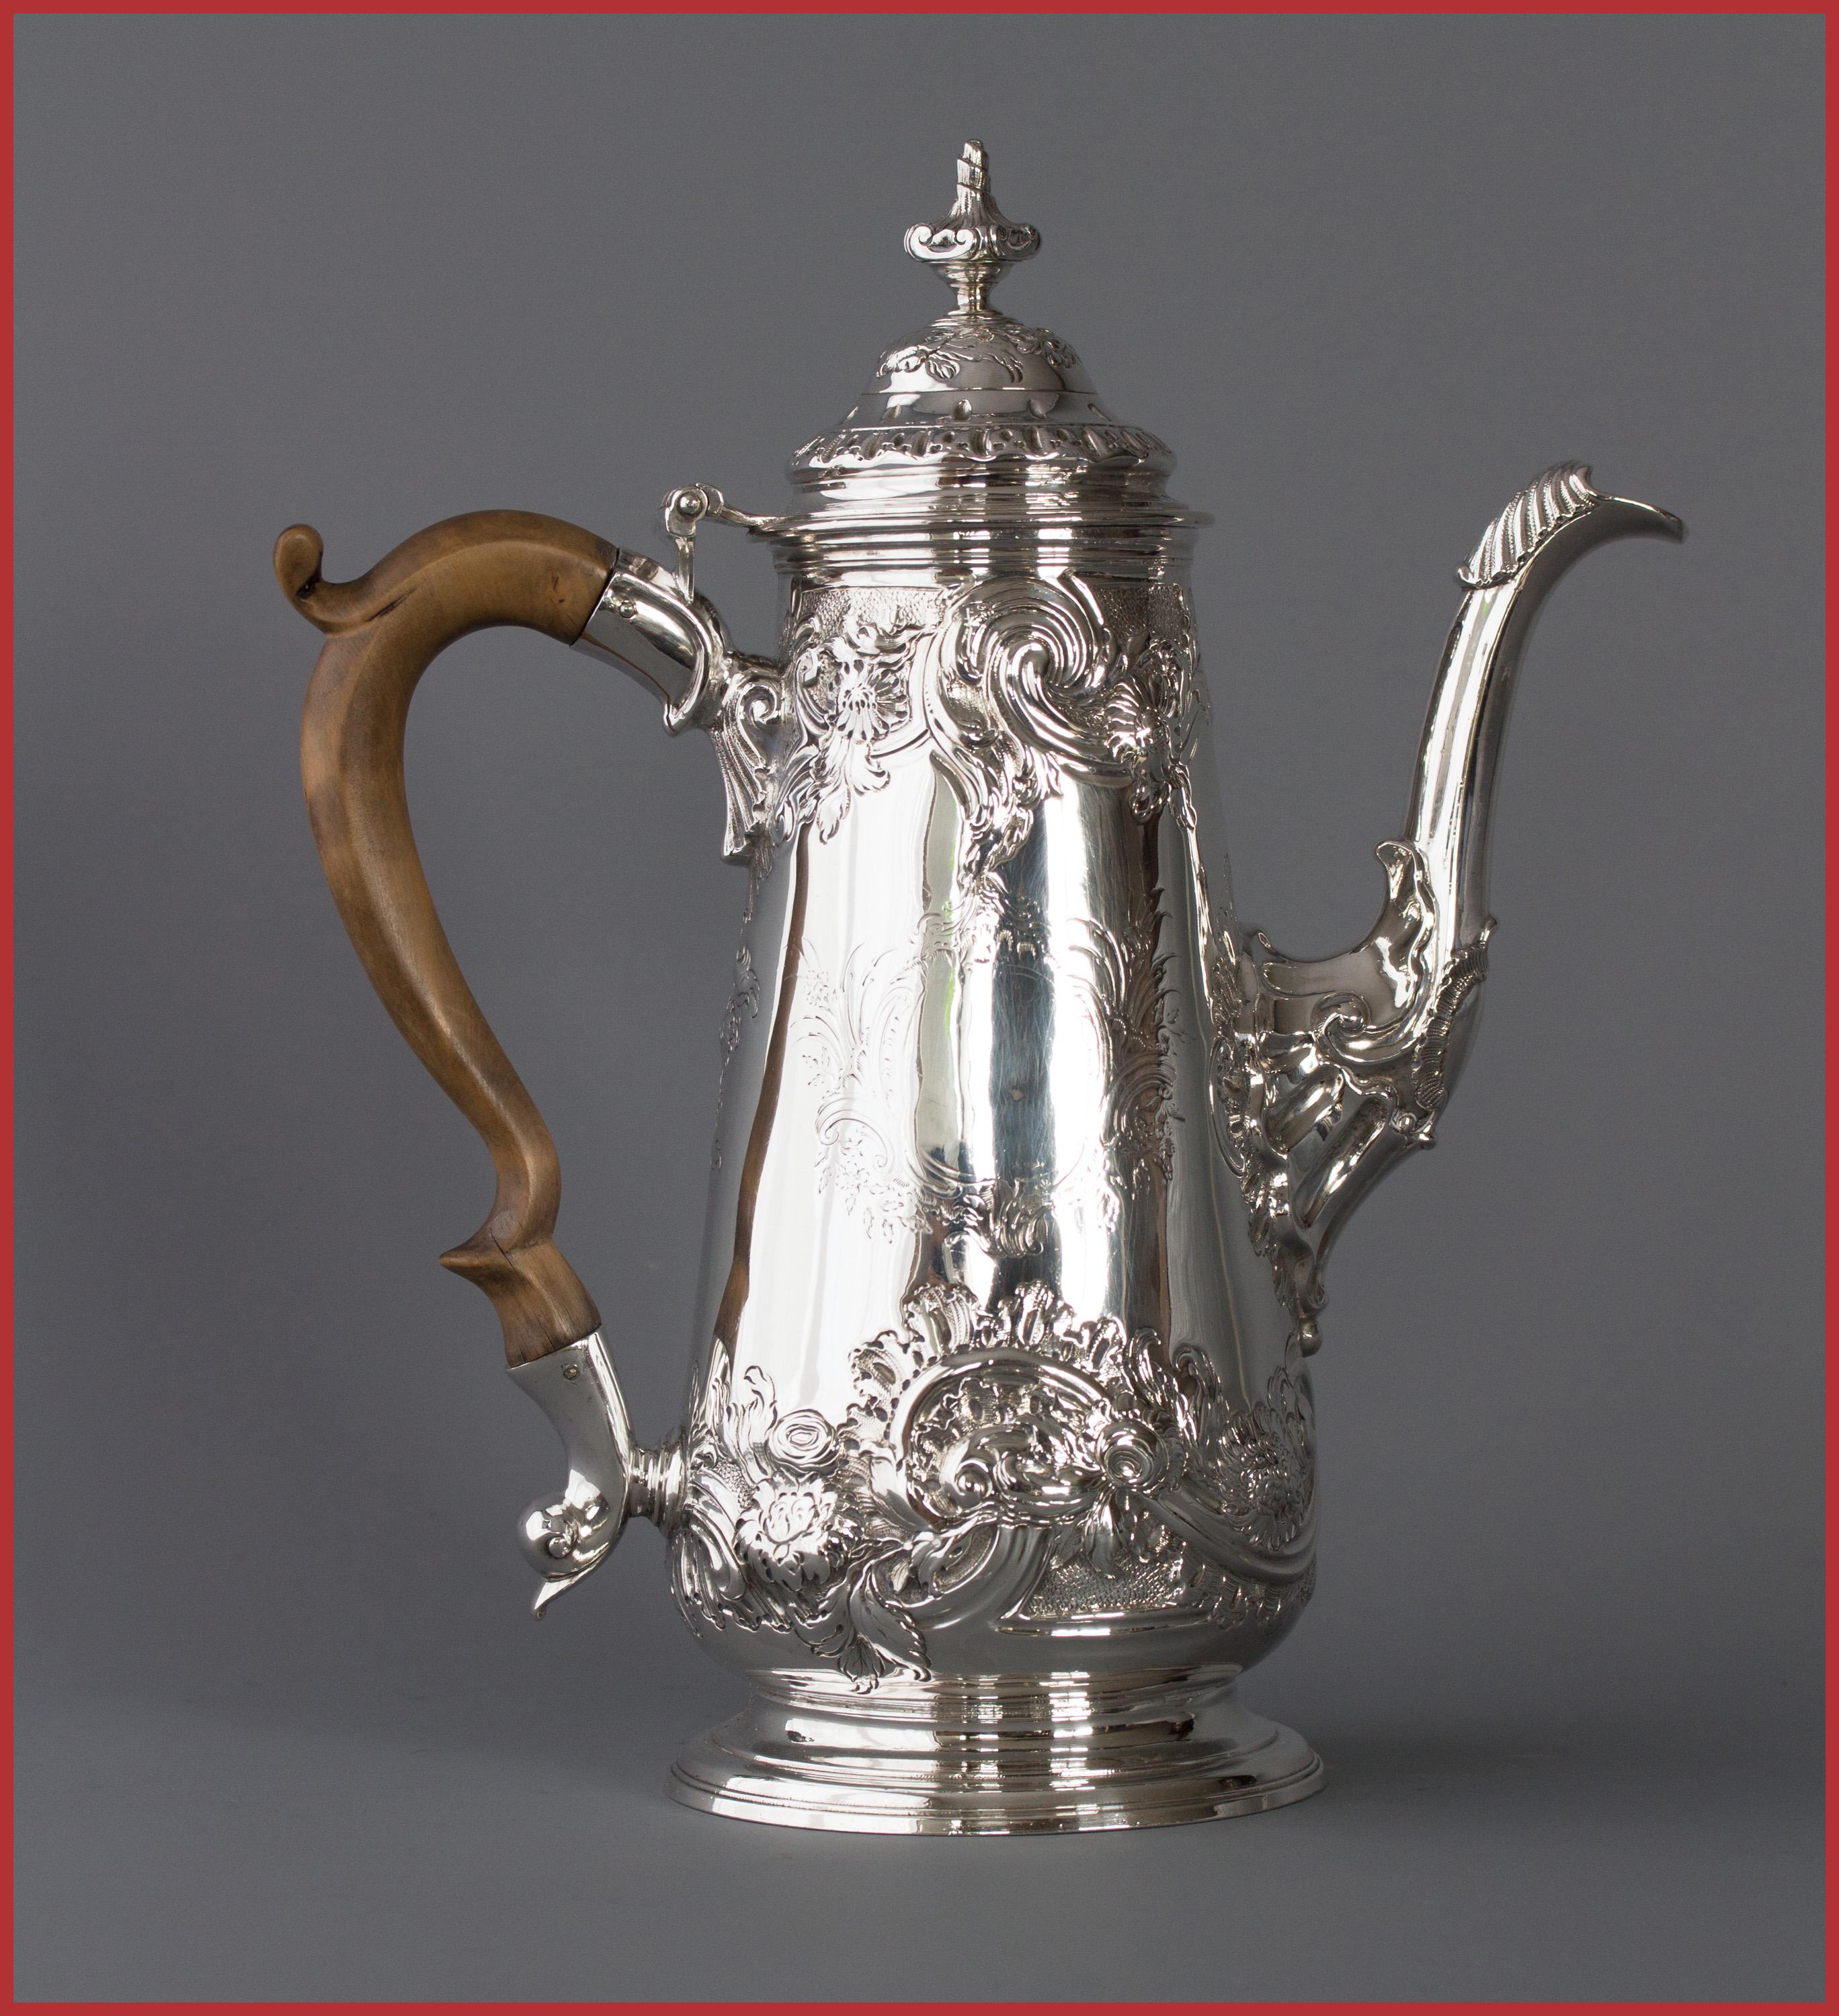 An excellent quality George II silver coffee pot by the renowned Huguenot silversmith Samuel Courtauld. Of plain tapering baluster form with embossed floral and scroll decoration, cast leaf-capped spout, a high raised floral decorated domed lid with